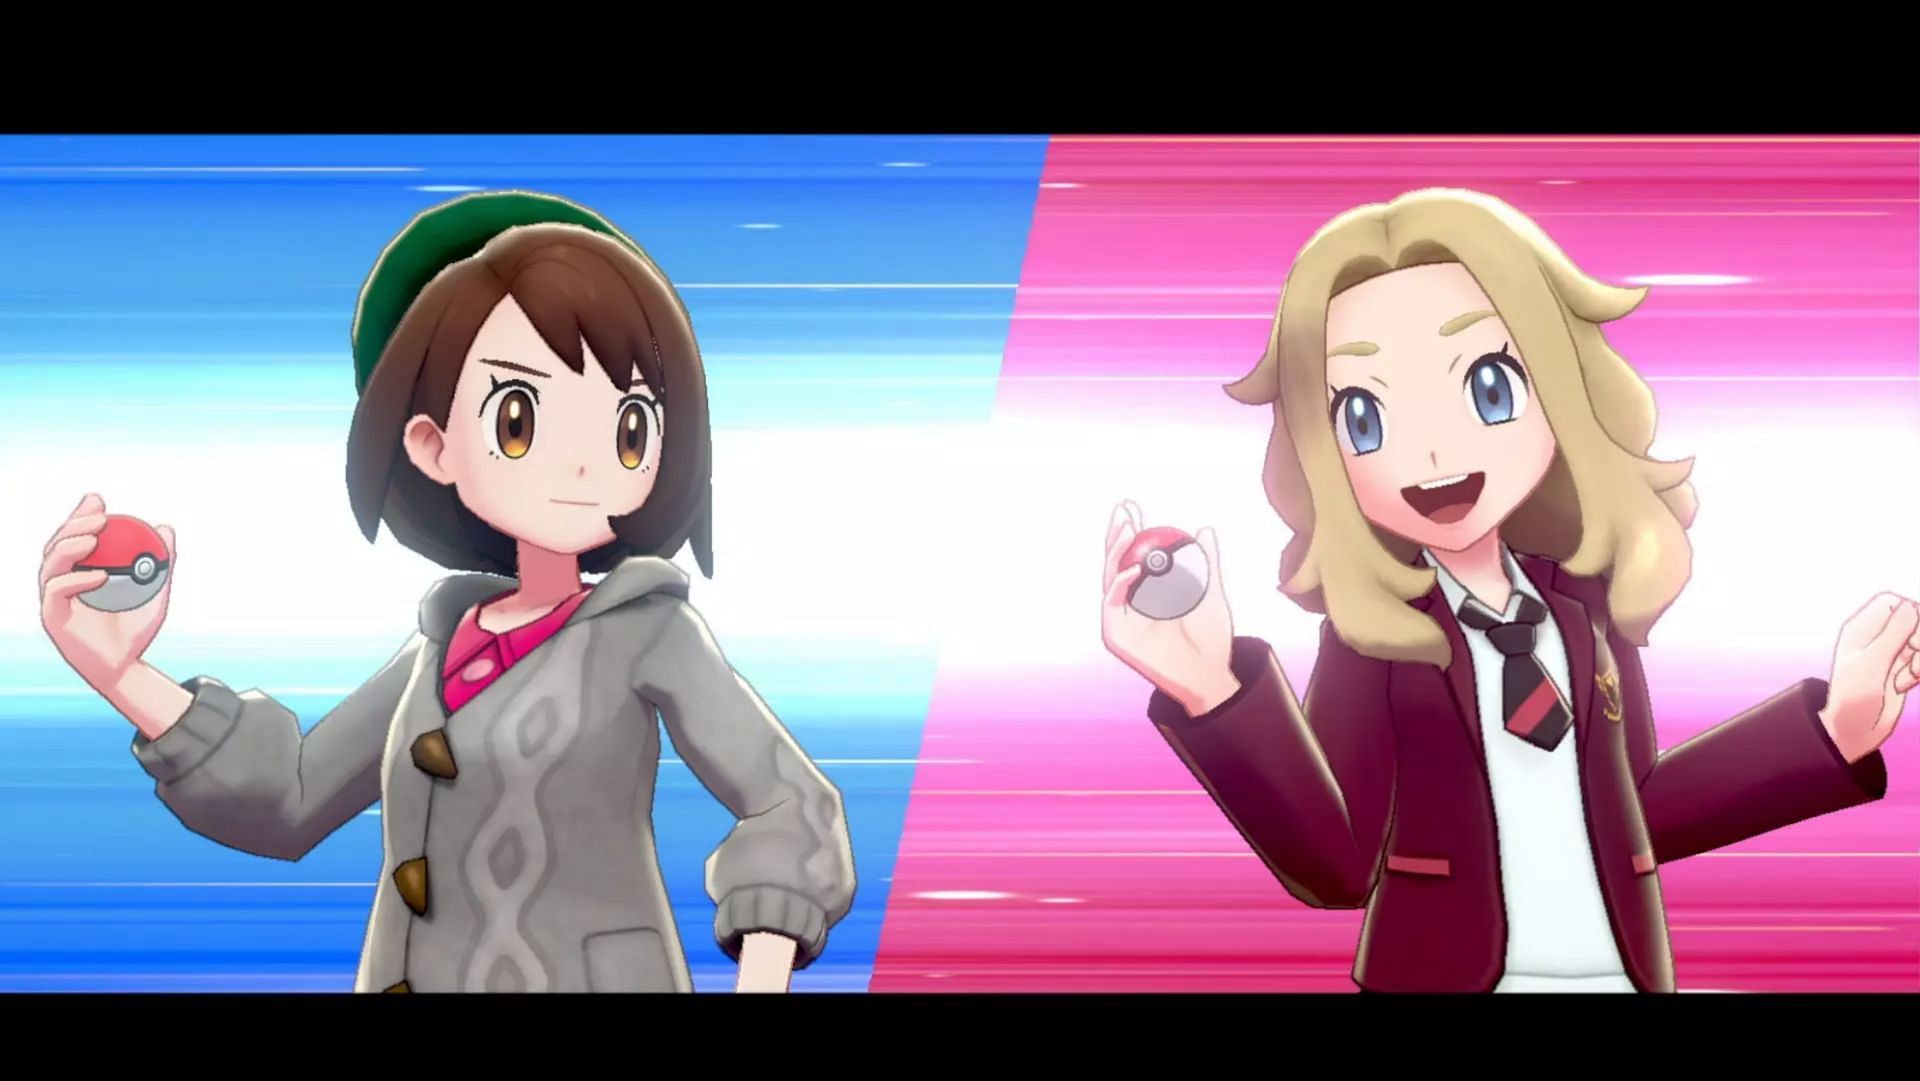 The Pokémon Sword & Shield Champion League Online Competitions has started